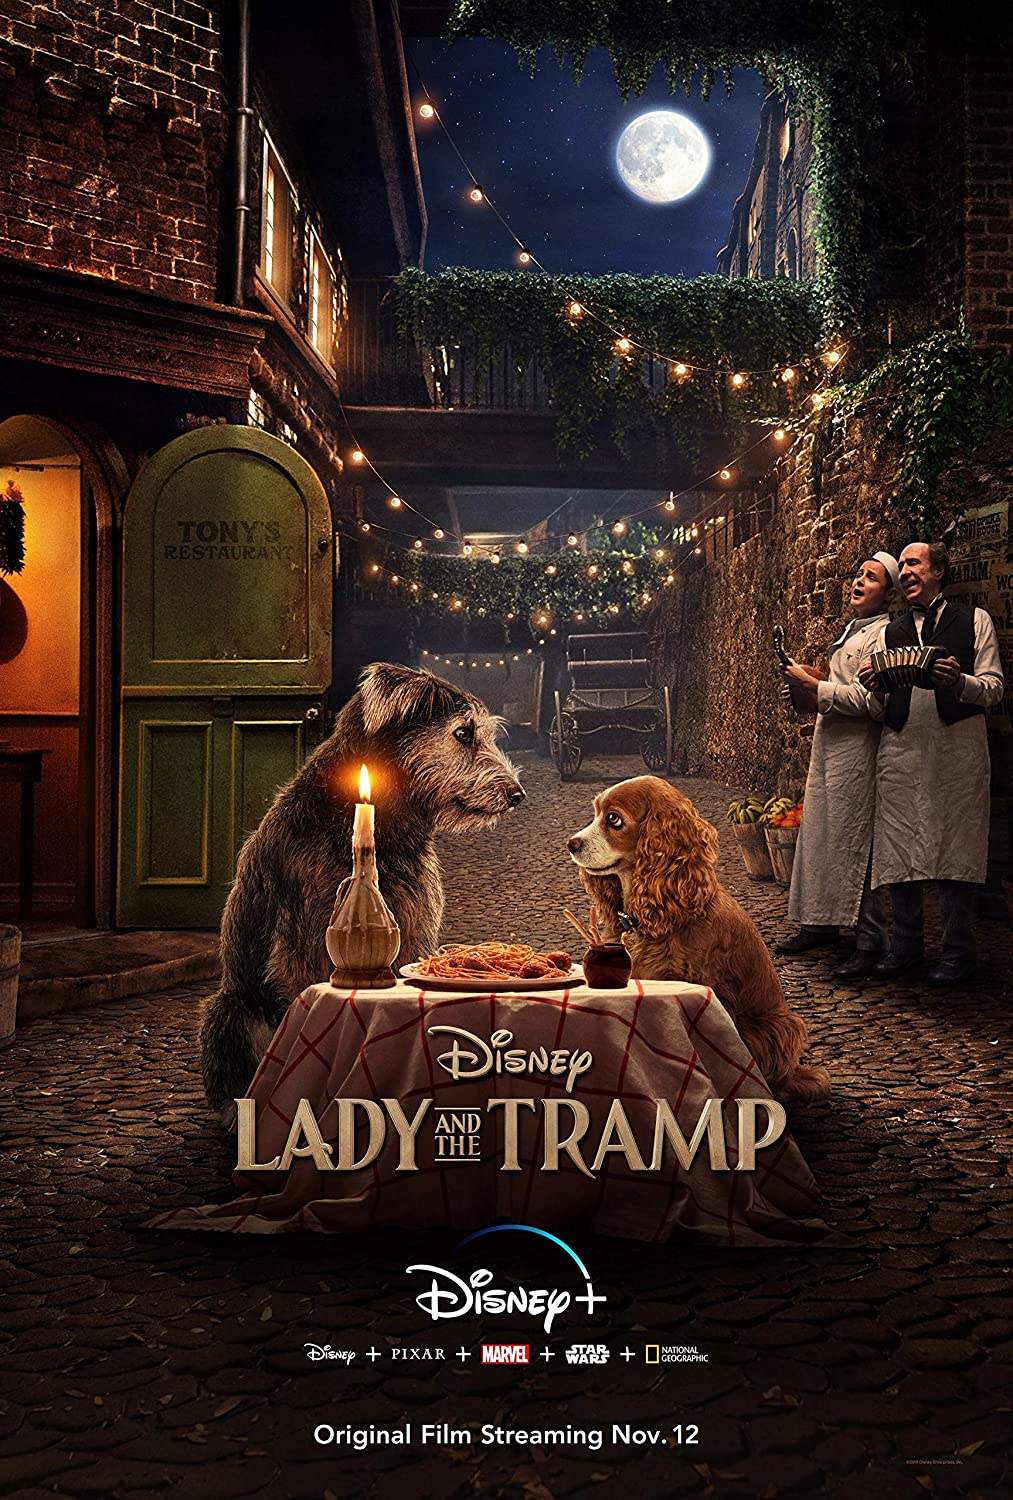 Mahshid Sadoughi honors iconic Disney films while recreating ‘Lady and the Tramp’